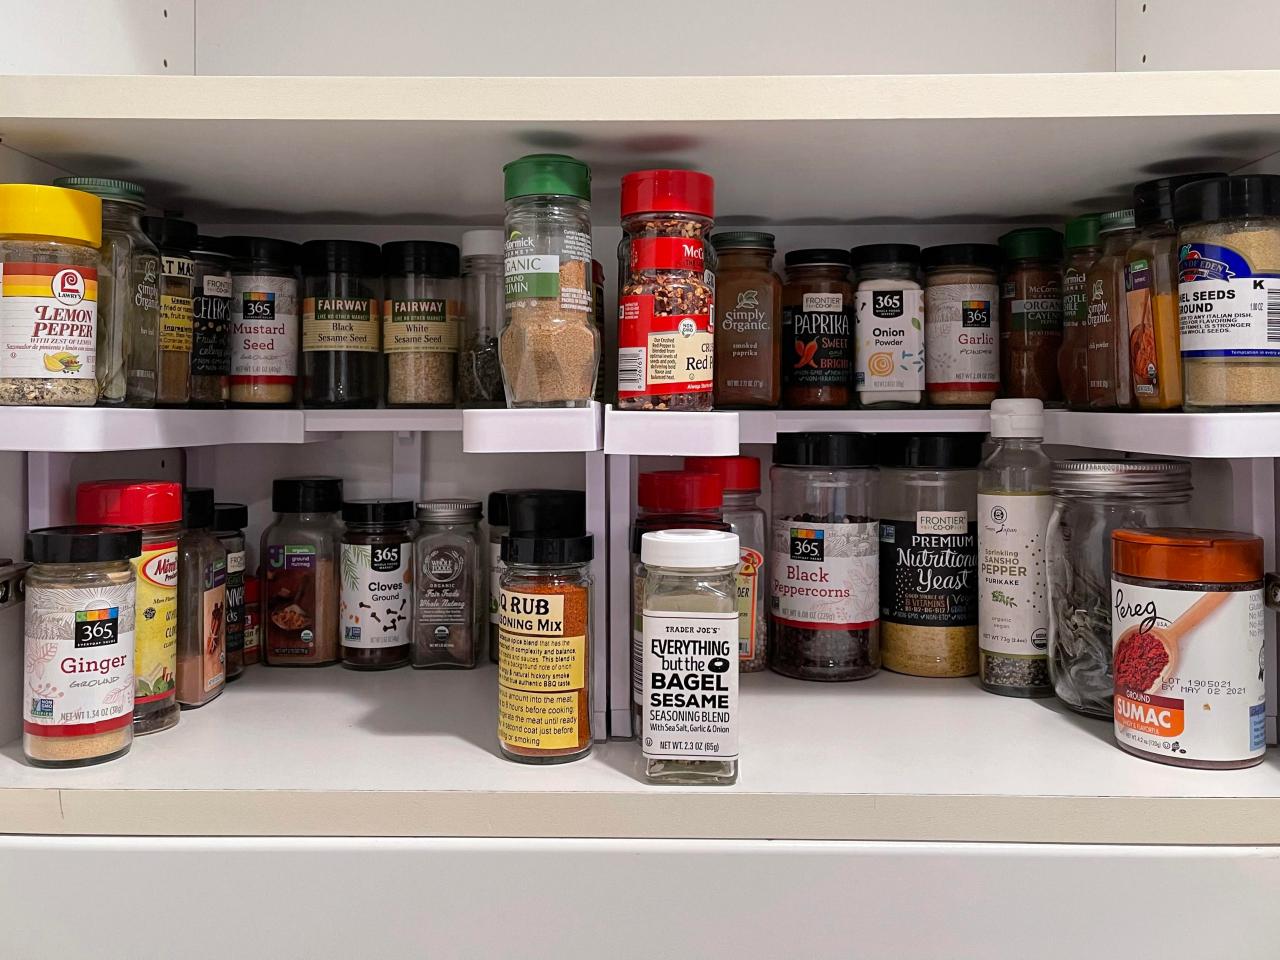 How I Completely Organized My Spice Shelf So I Can Read Every